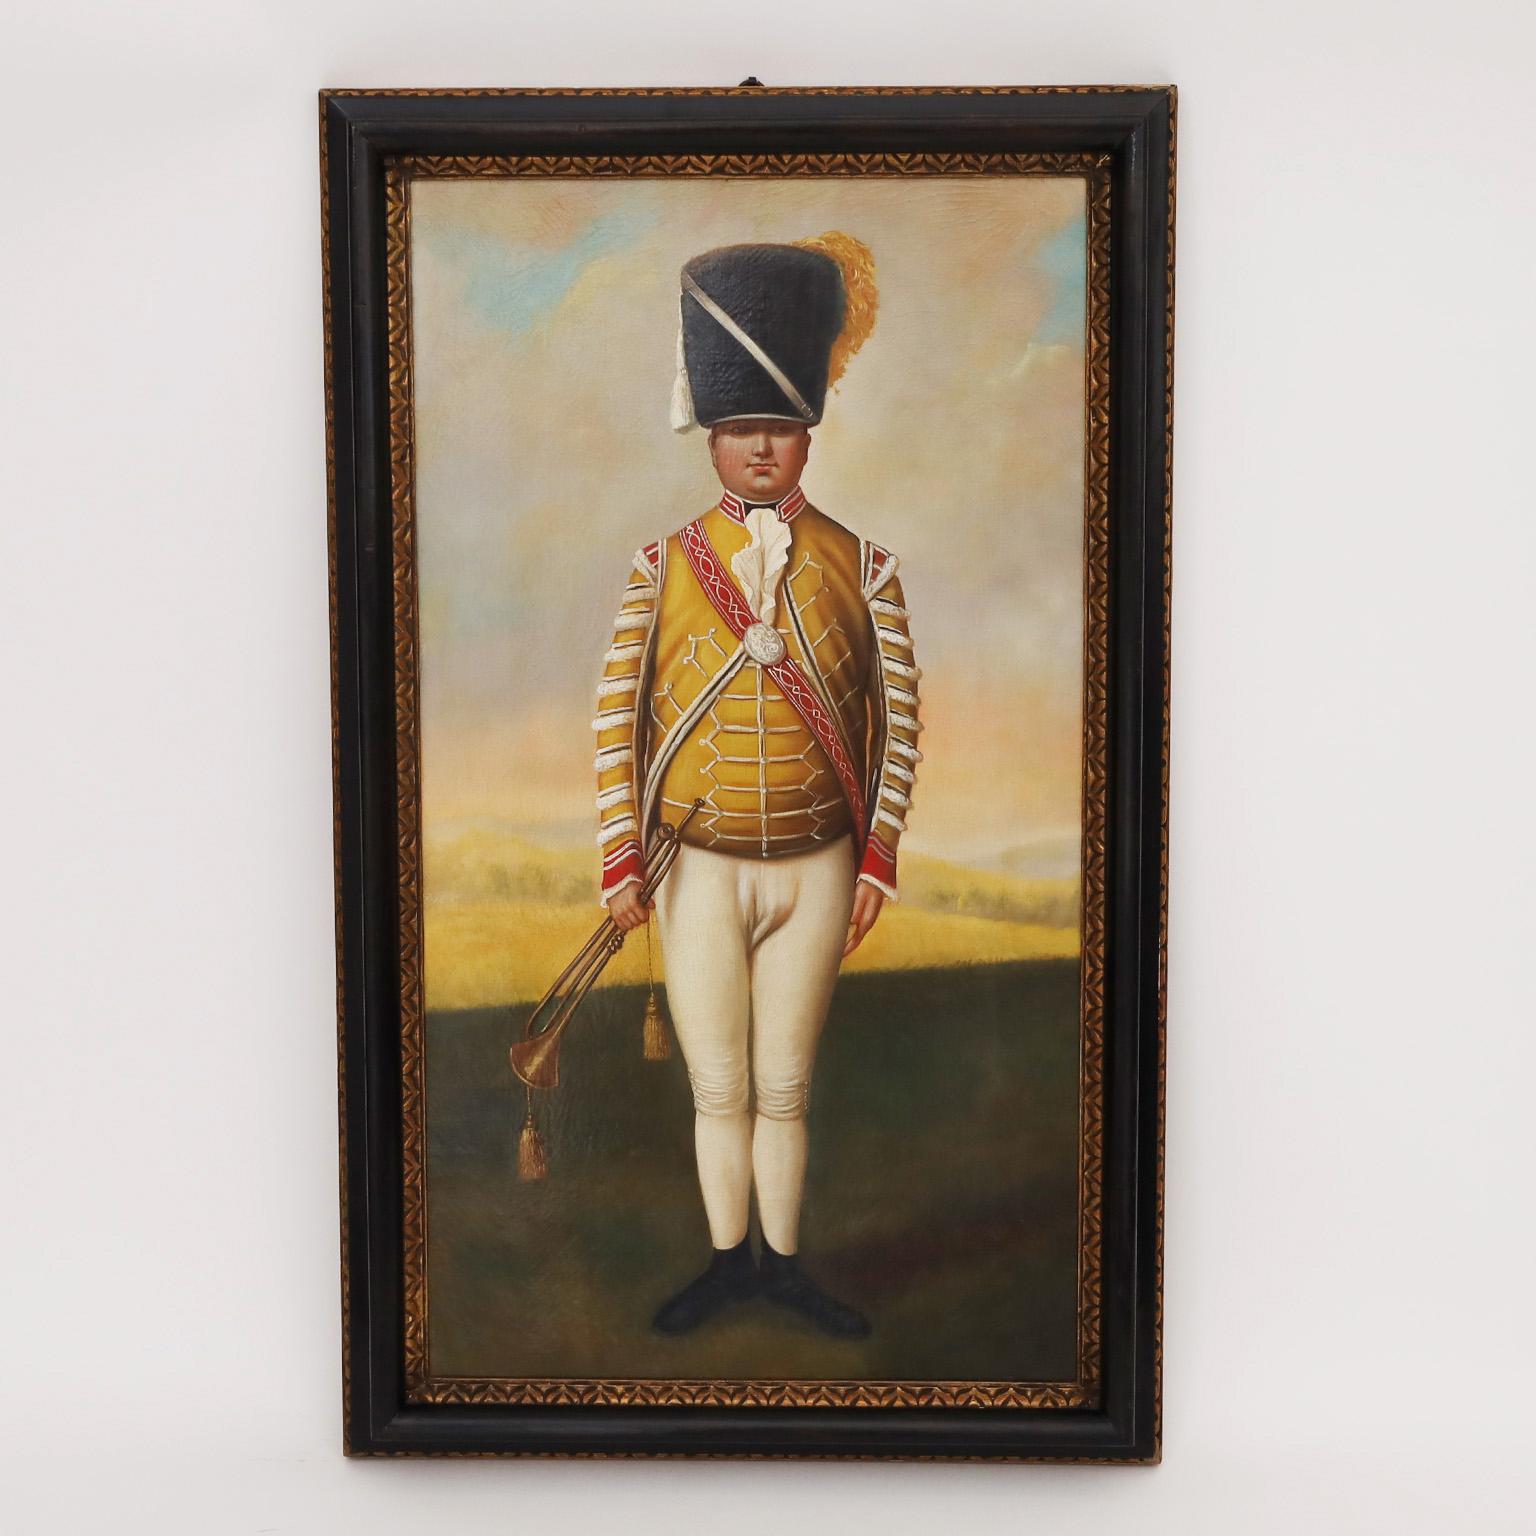 Antique Pair of Oil Paintings on Canvas of Soldiers in Uniform - Beige Figurative Painting by Unknown